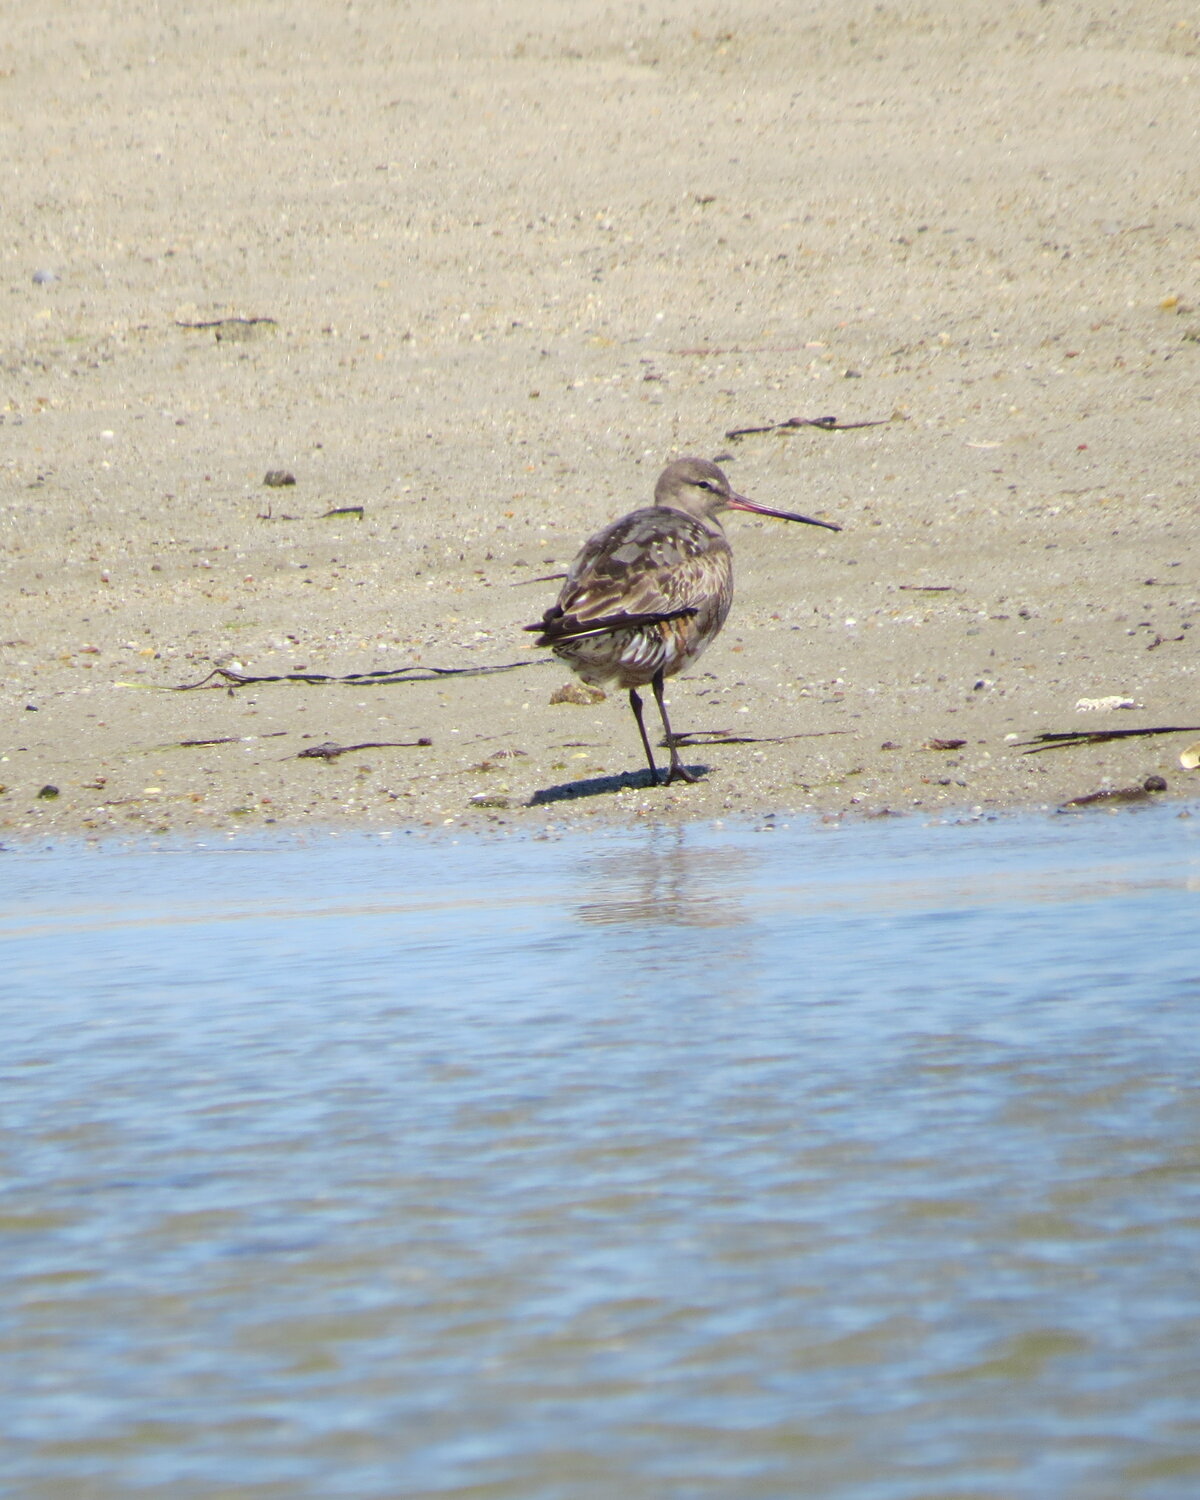 This adult Hudsonian Godwit delighted observers at Polpis Harbor this week.